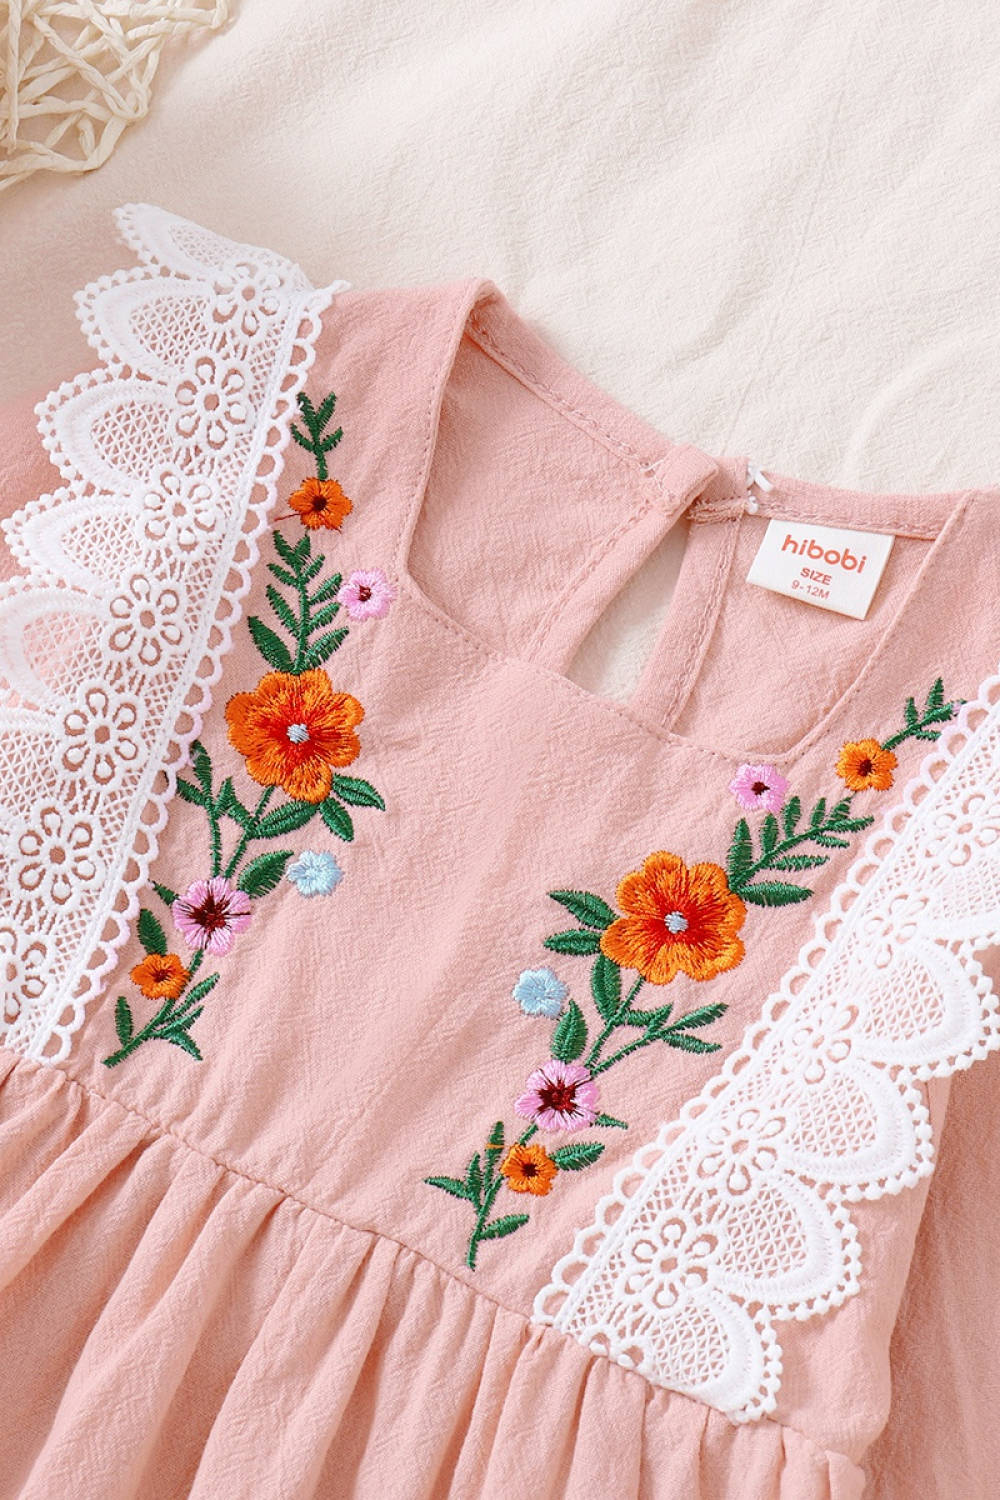 Girls Embroidered Lace Trim Dress